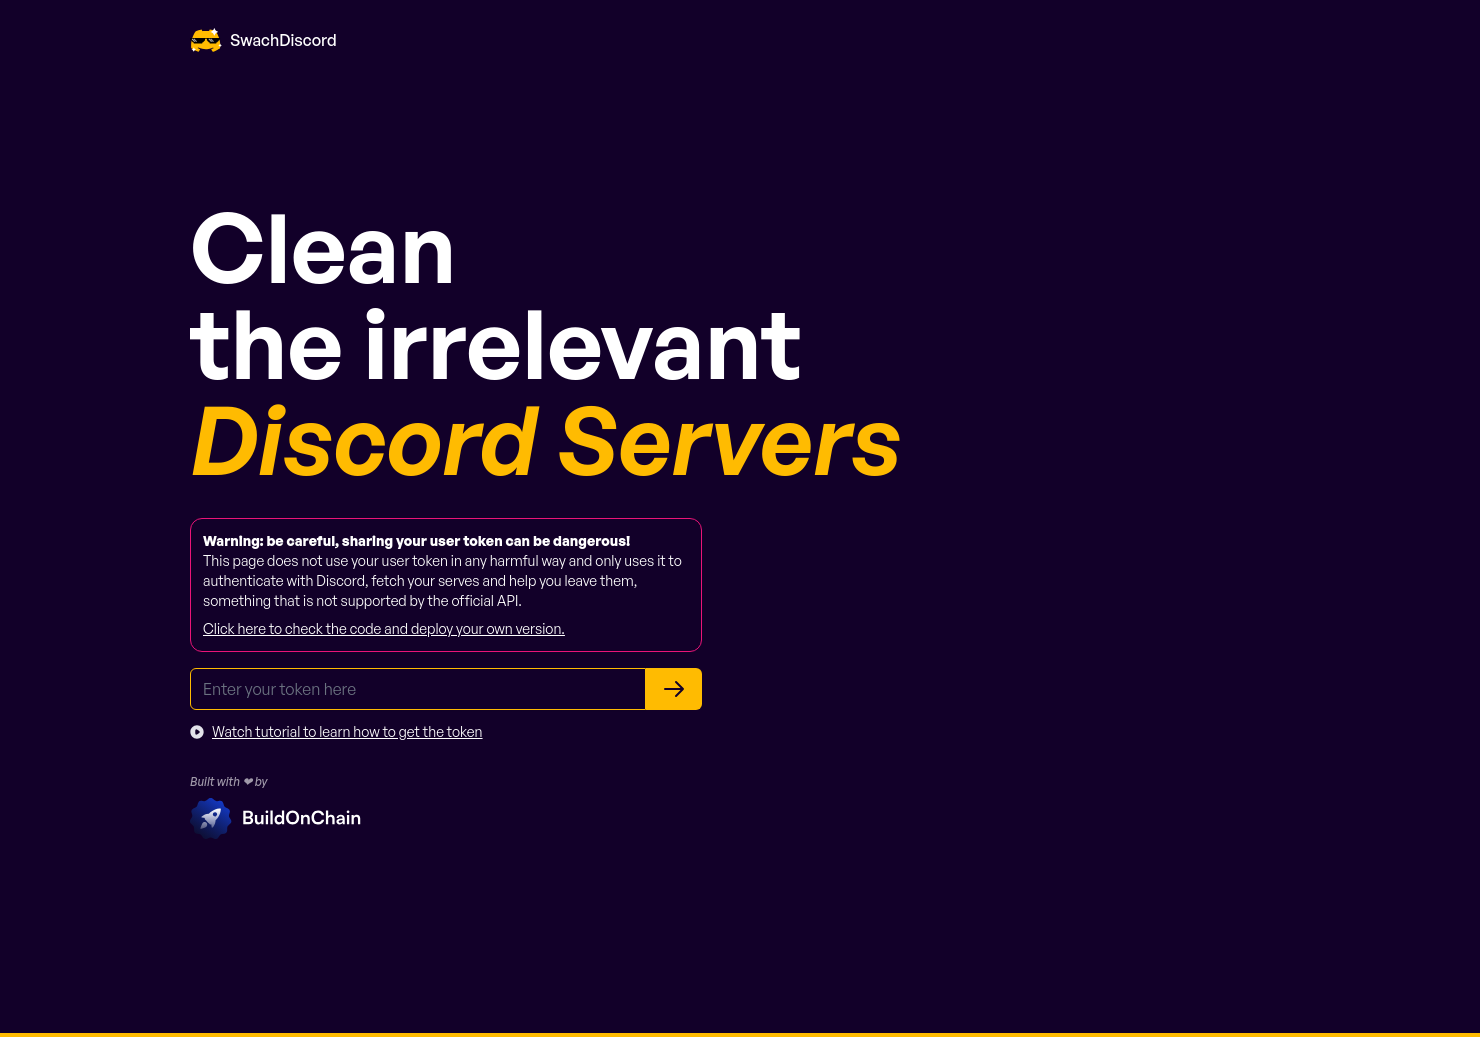 startuptile Swach Discord By BuildOnChain-Clean the irrelevant Discord servers